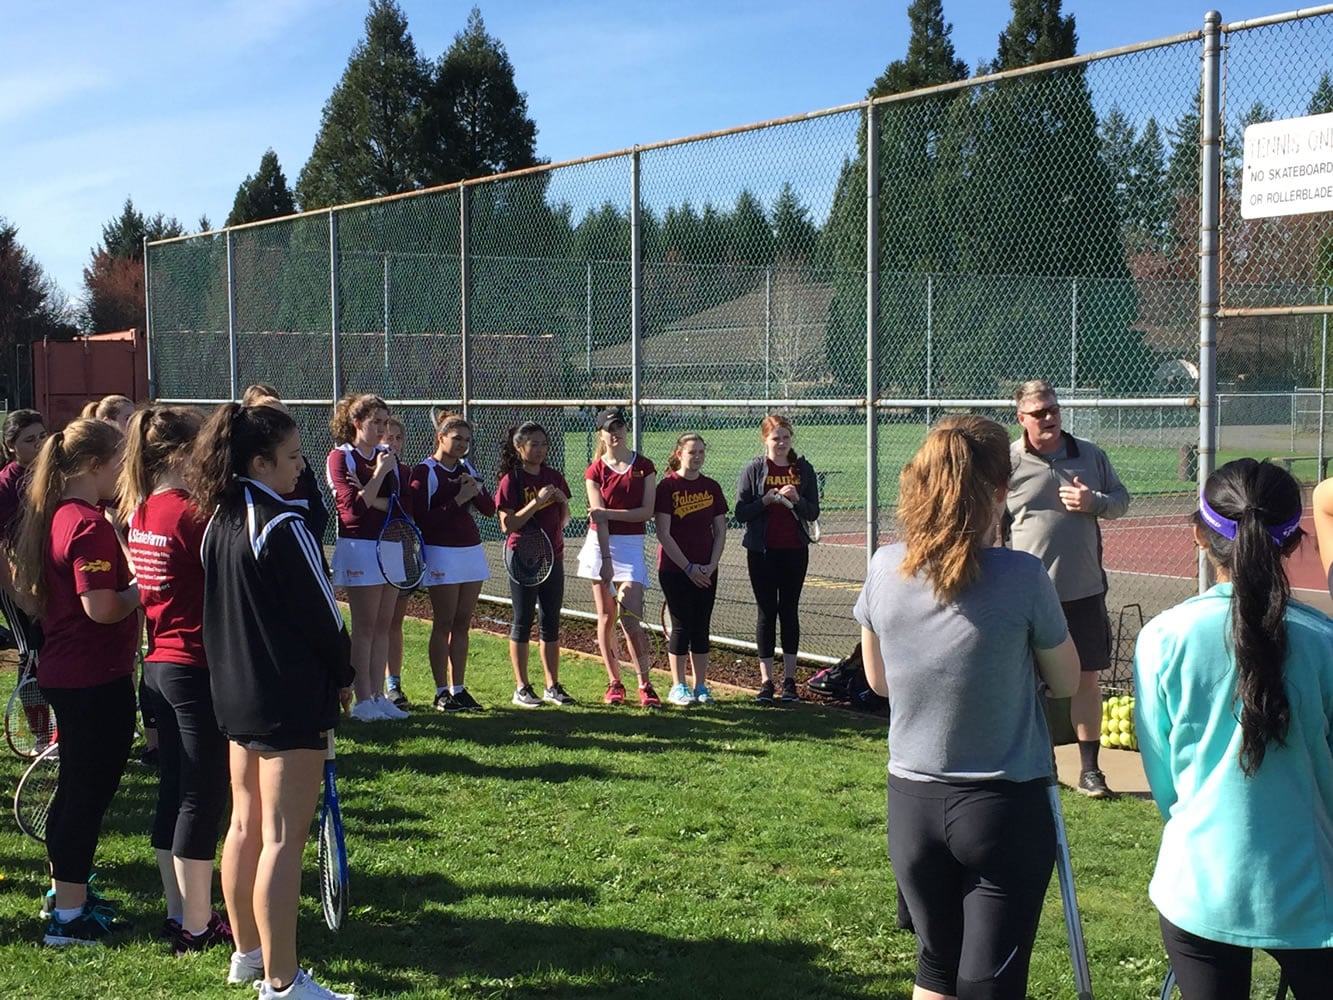 Prairie and Union tennis players receive instructions before the start of junior varsity and C team matches Wednesday at Prairie High School (Micah Rice/The Columbian)